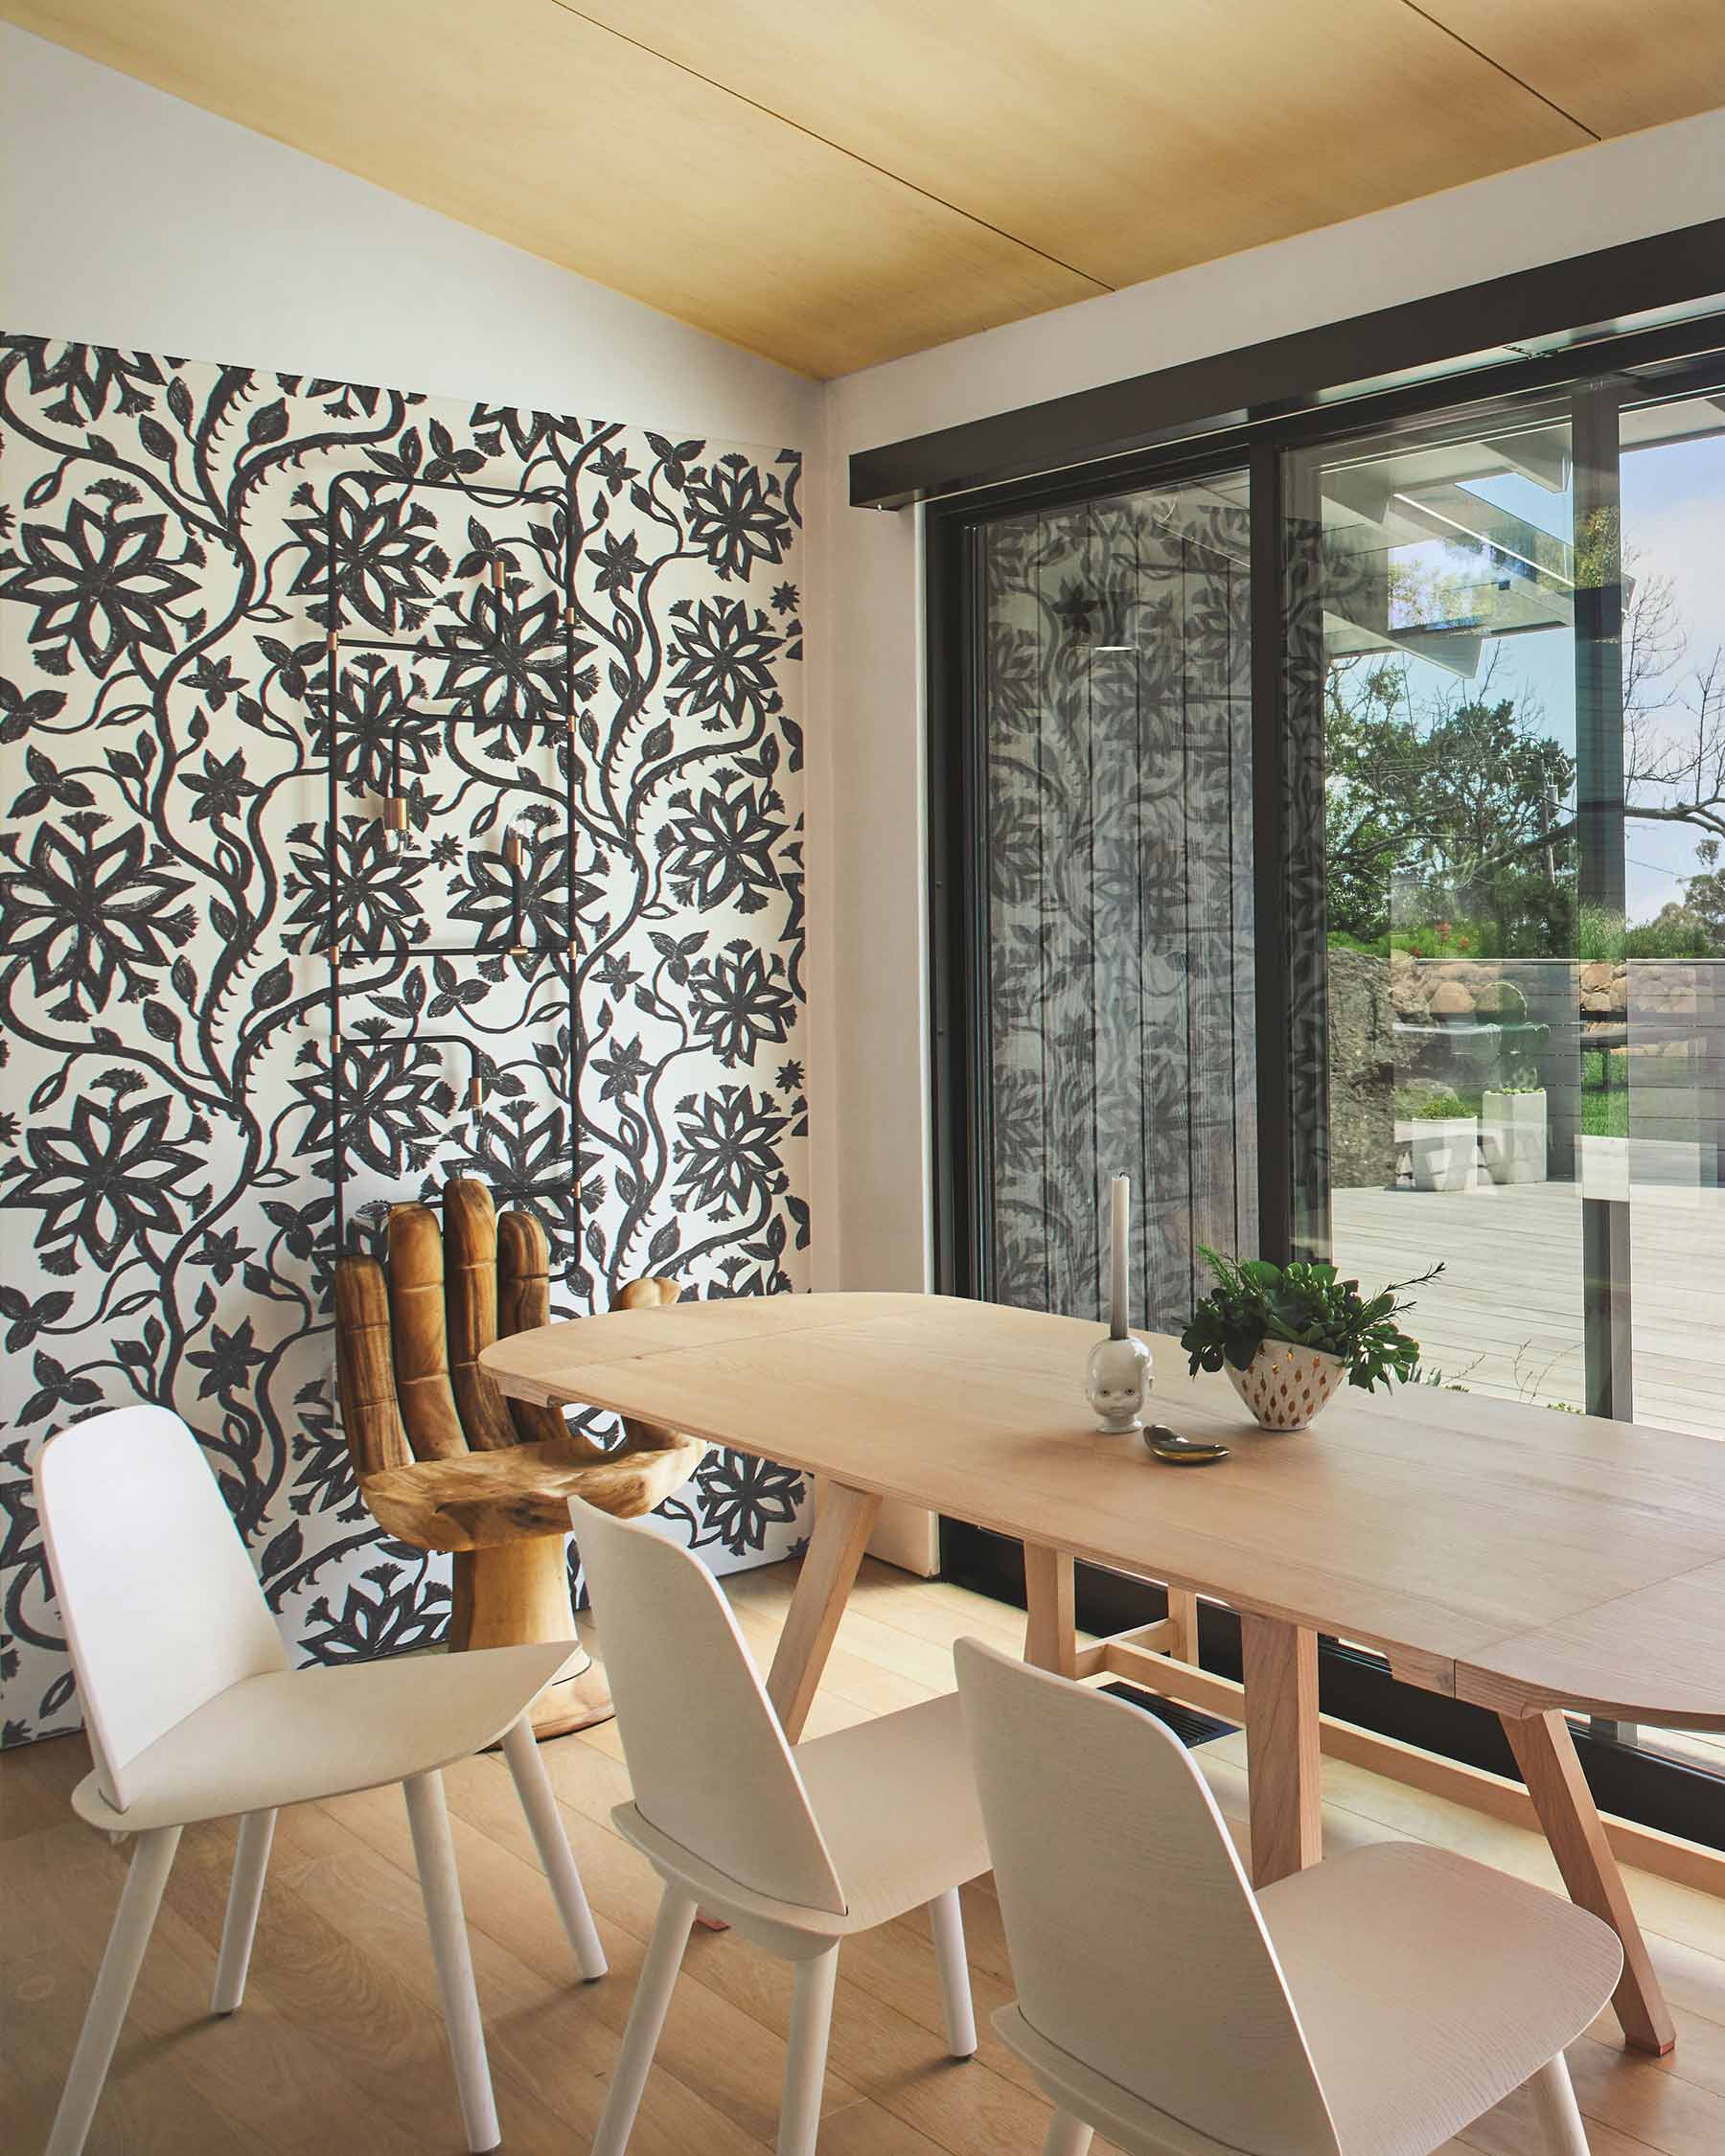 Khovar flower wallpaper, modern, graphic large scale repeat wallpaper in a kitchen designed by House of Honey